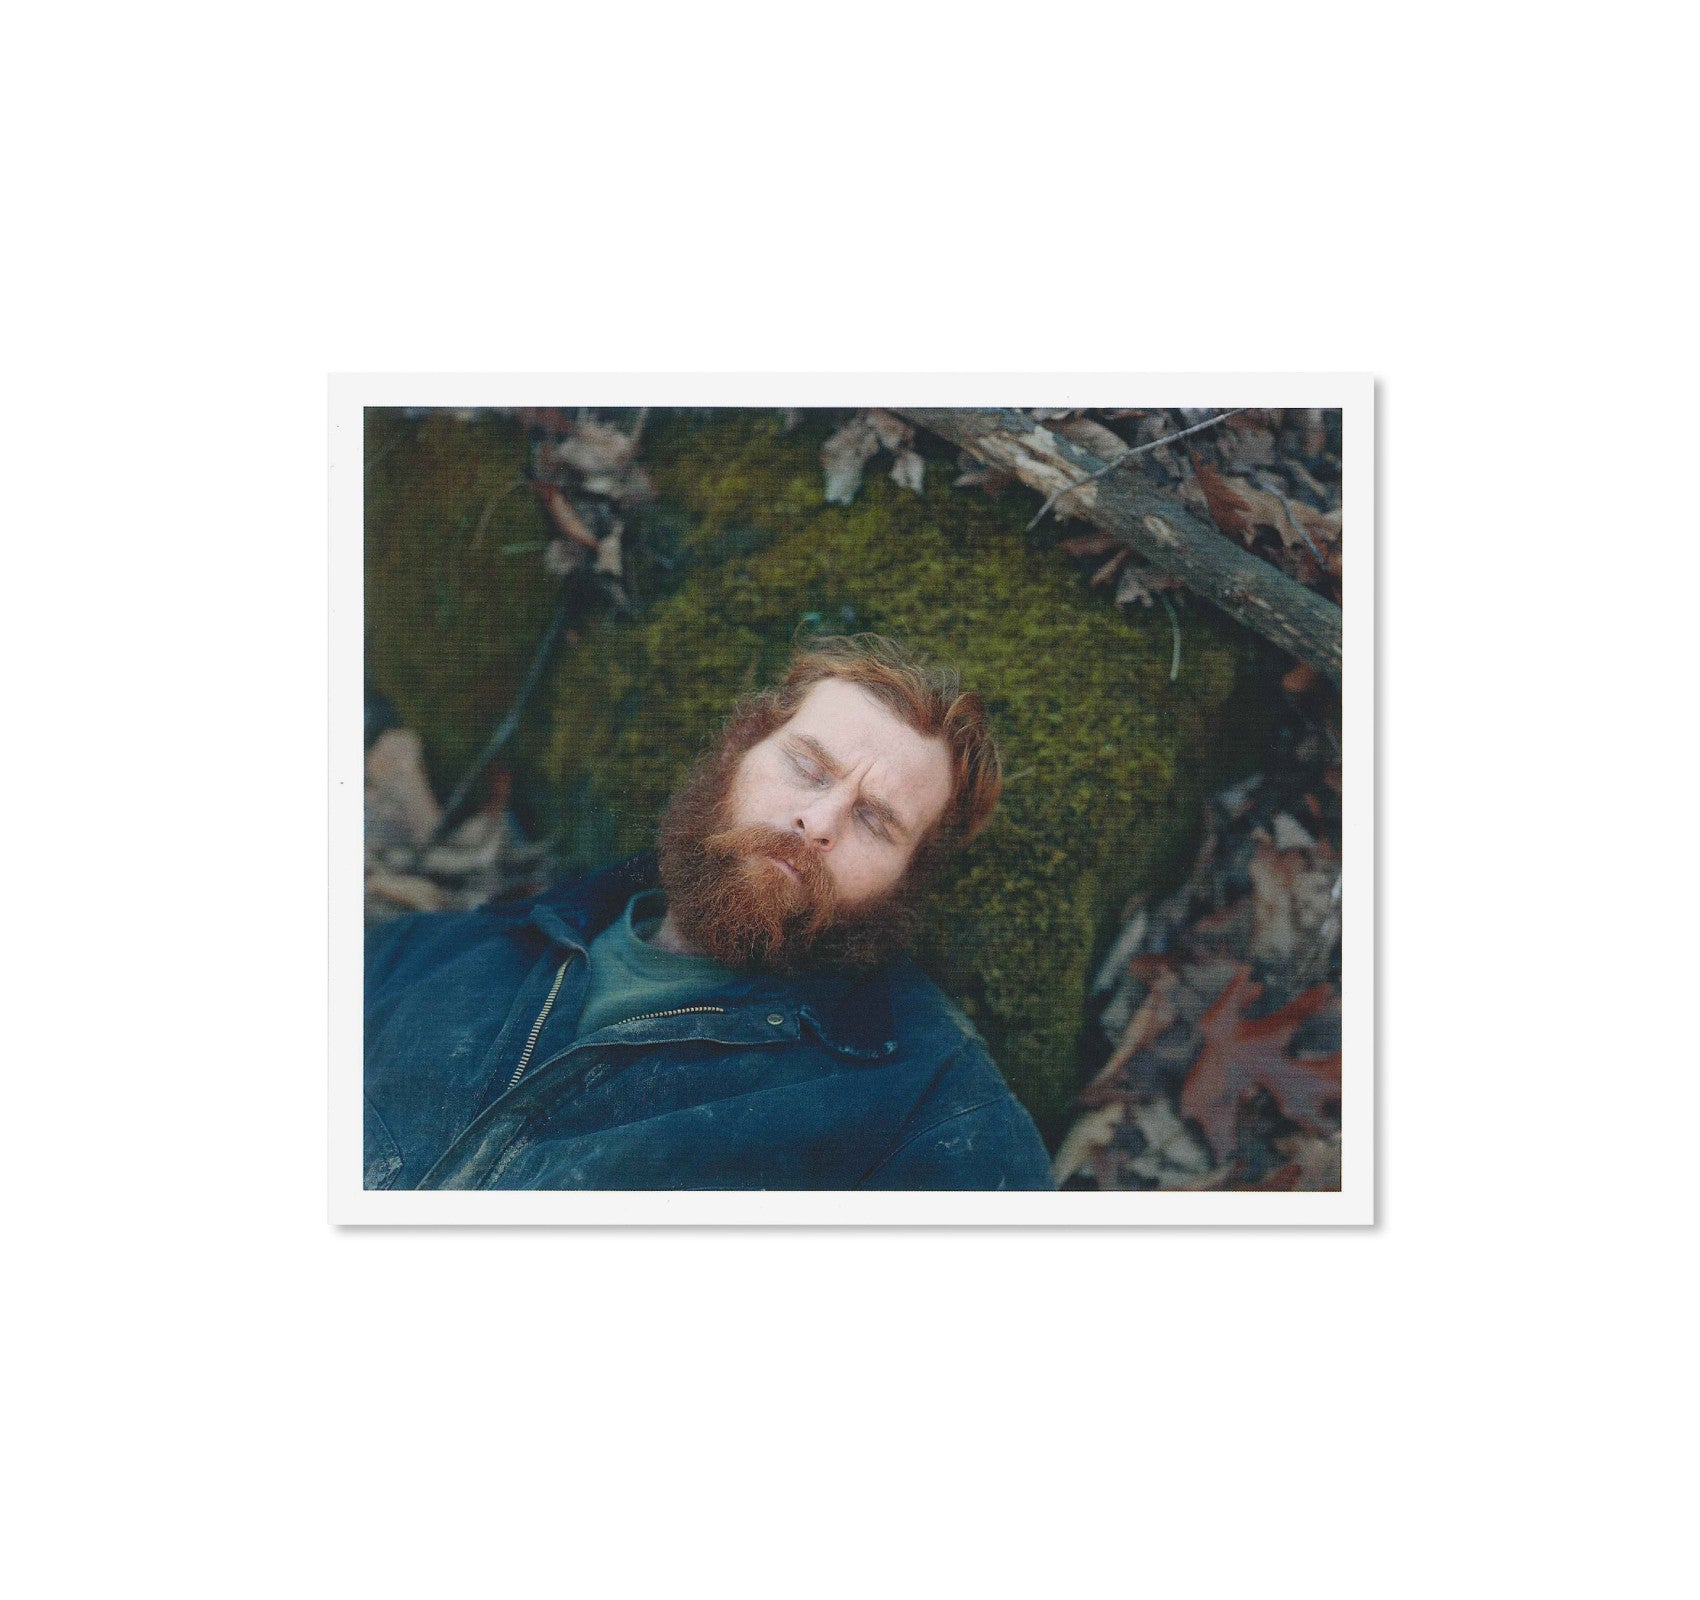 GATHERED LEAVES POSTCARDS by Alec Soth